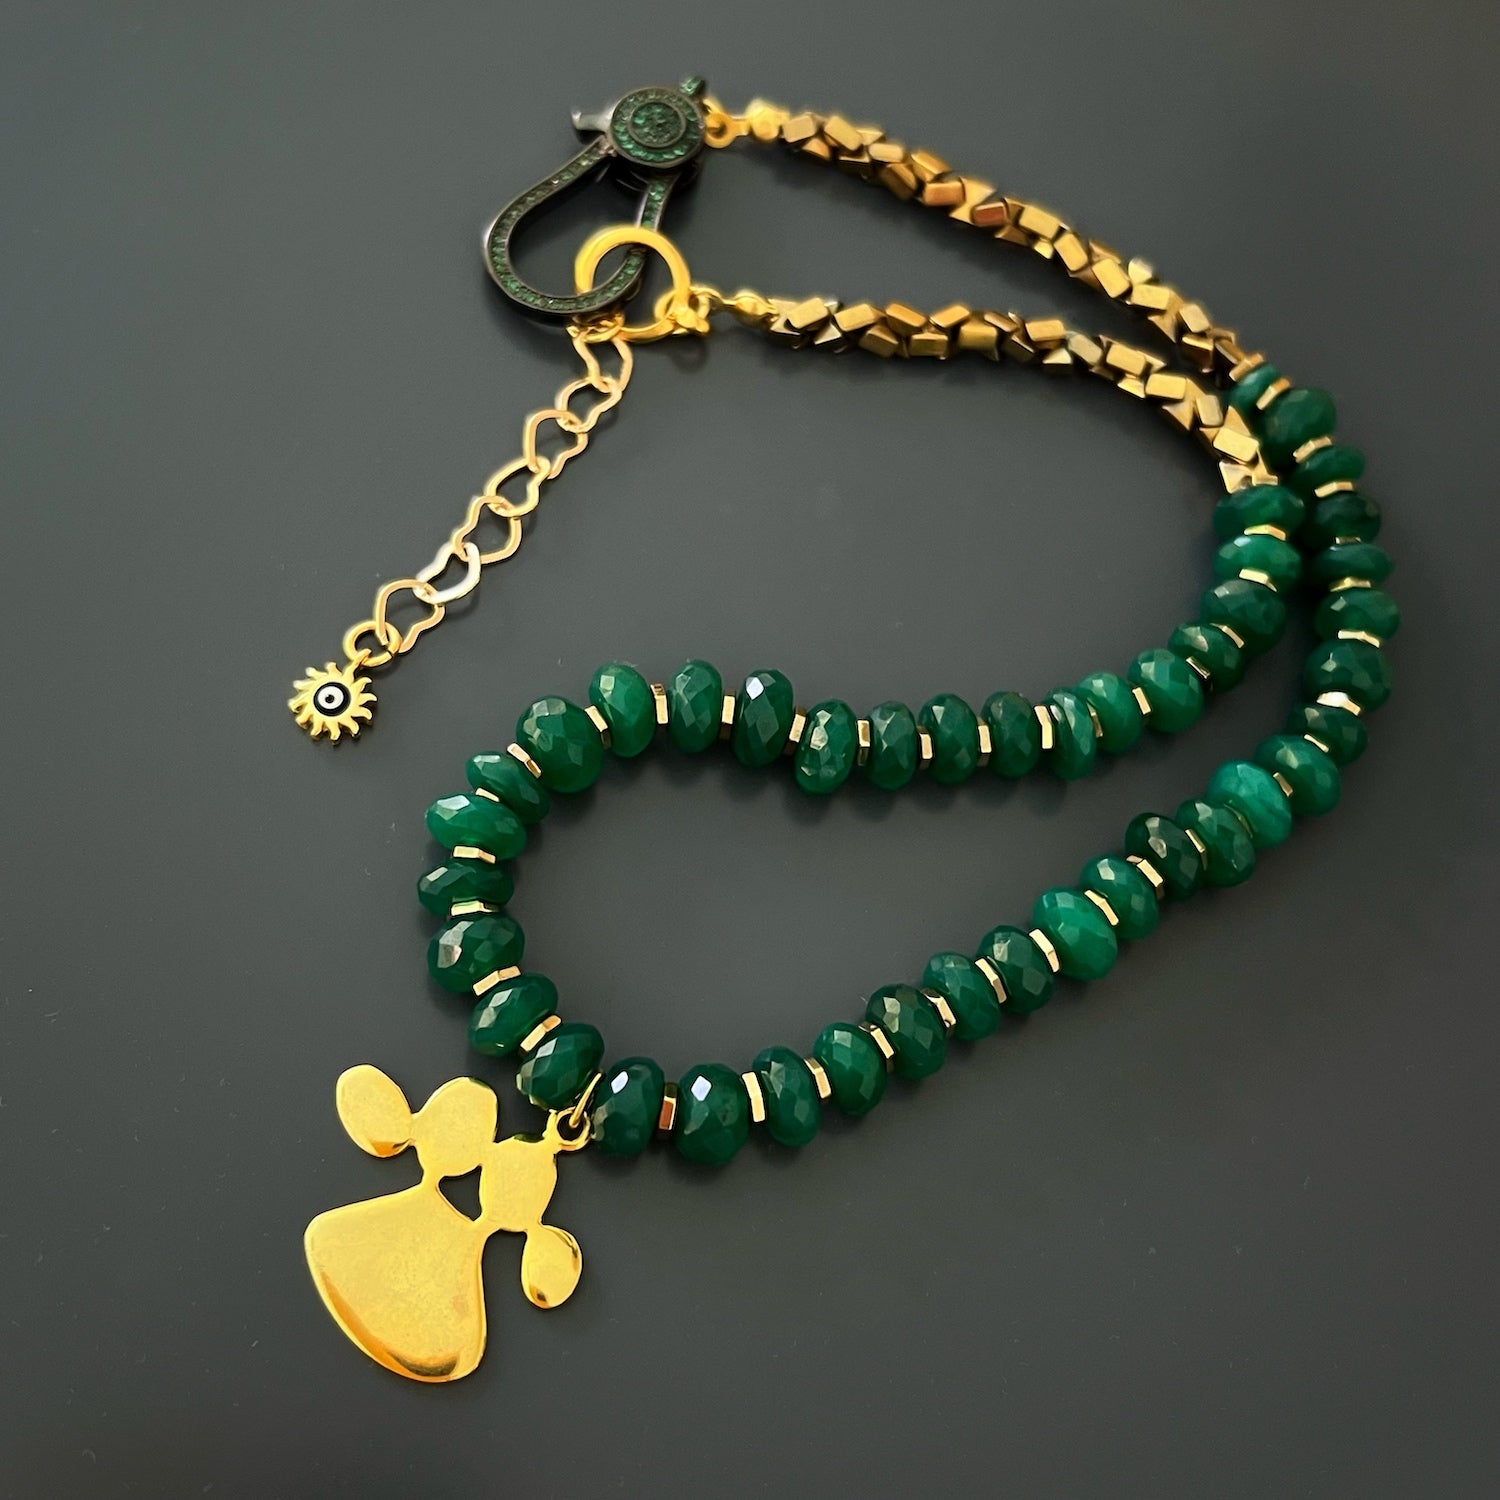 Experience the elegance of the Mother and Daughter Jade Necklace, featuring green jade stone beads and a symbolic mother and daughter pendant in sterling silver and 18k gold plating.